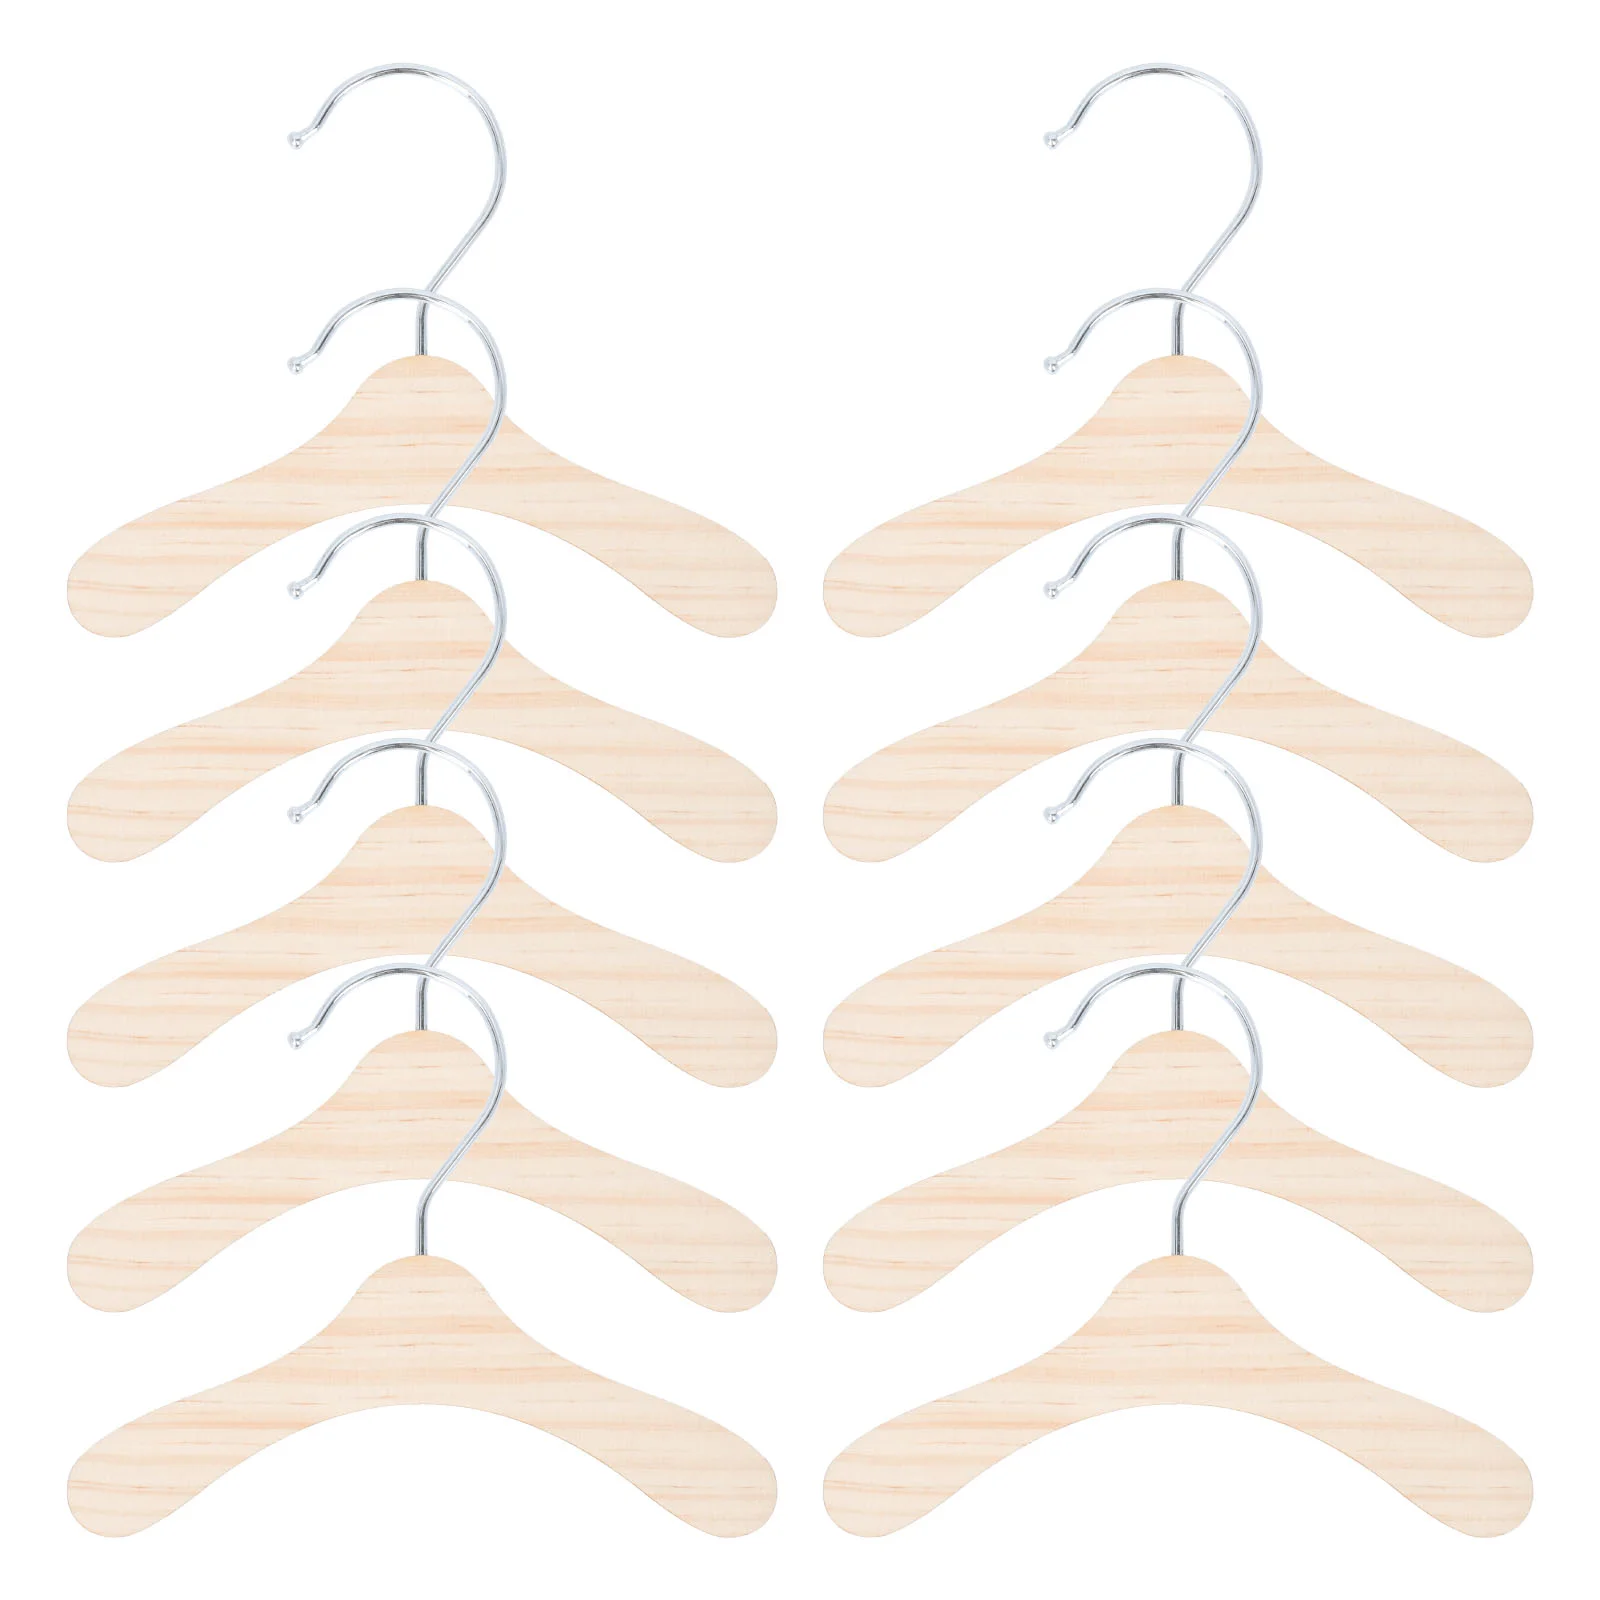 10 Pcs The Dog Pet Hanger Coat Hangers Playhouse Accessories Stainless Steel Wooden Clothing